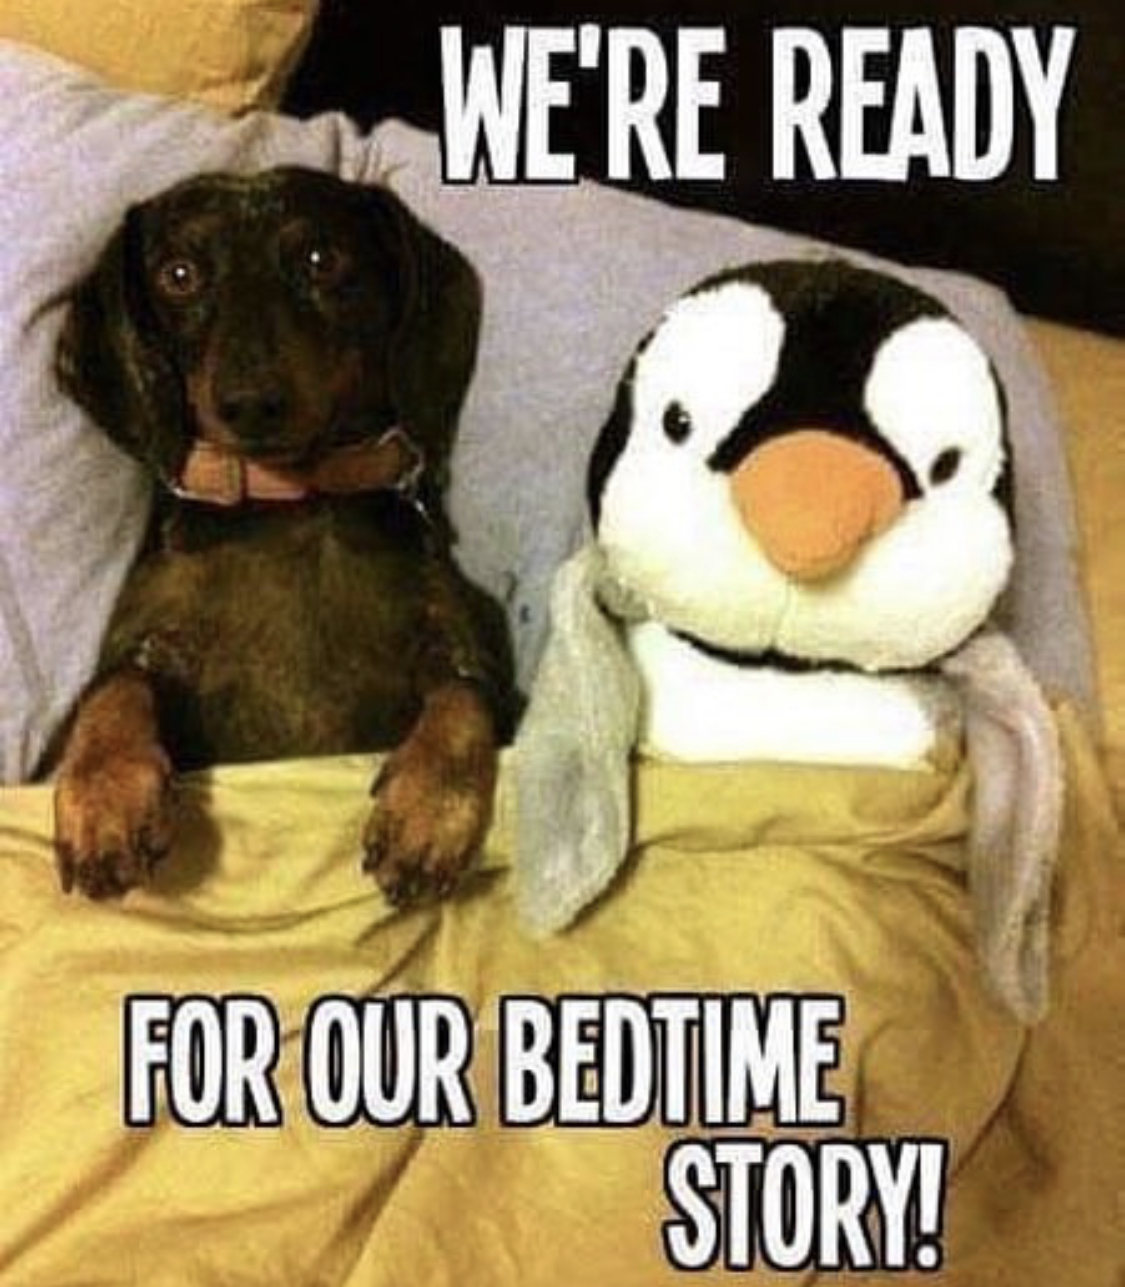 A Dachshund snuggled in bed next to its penguin stuffed toy photo with text - We're ready for our bed time story!